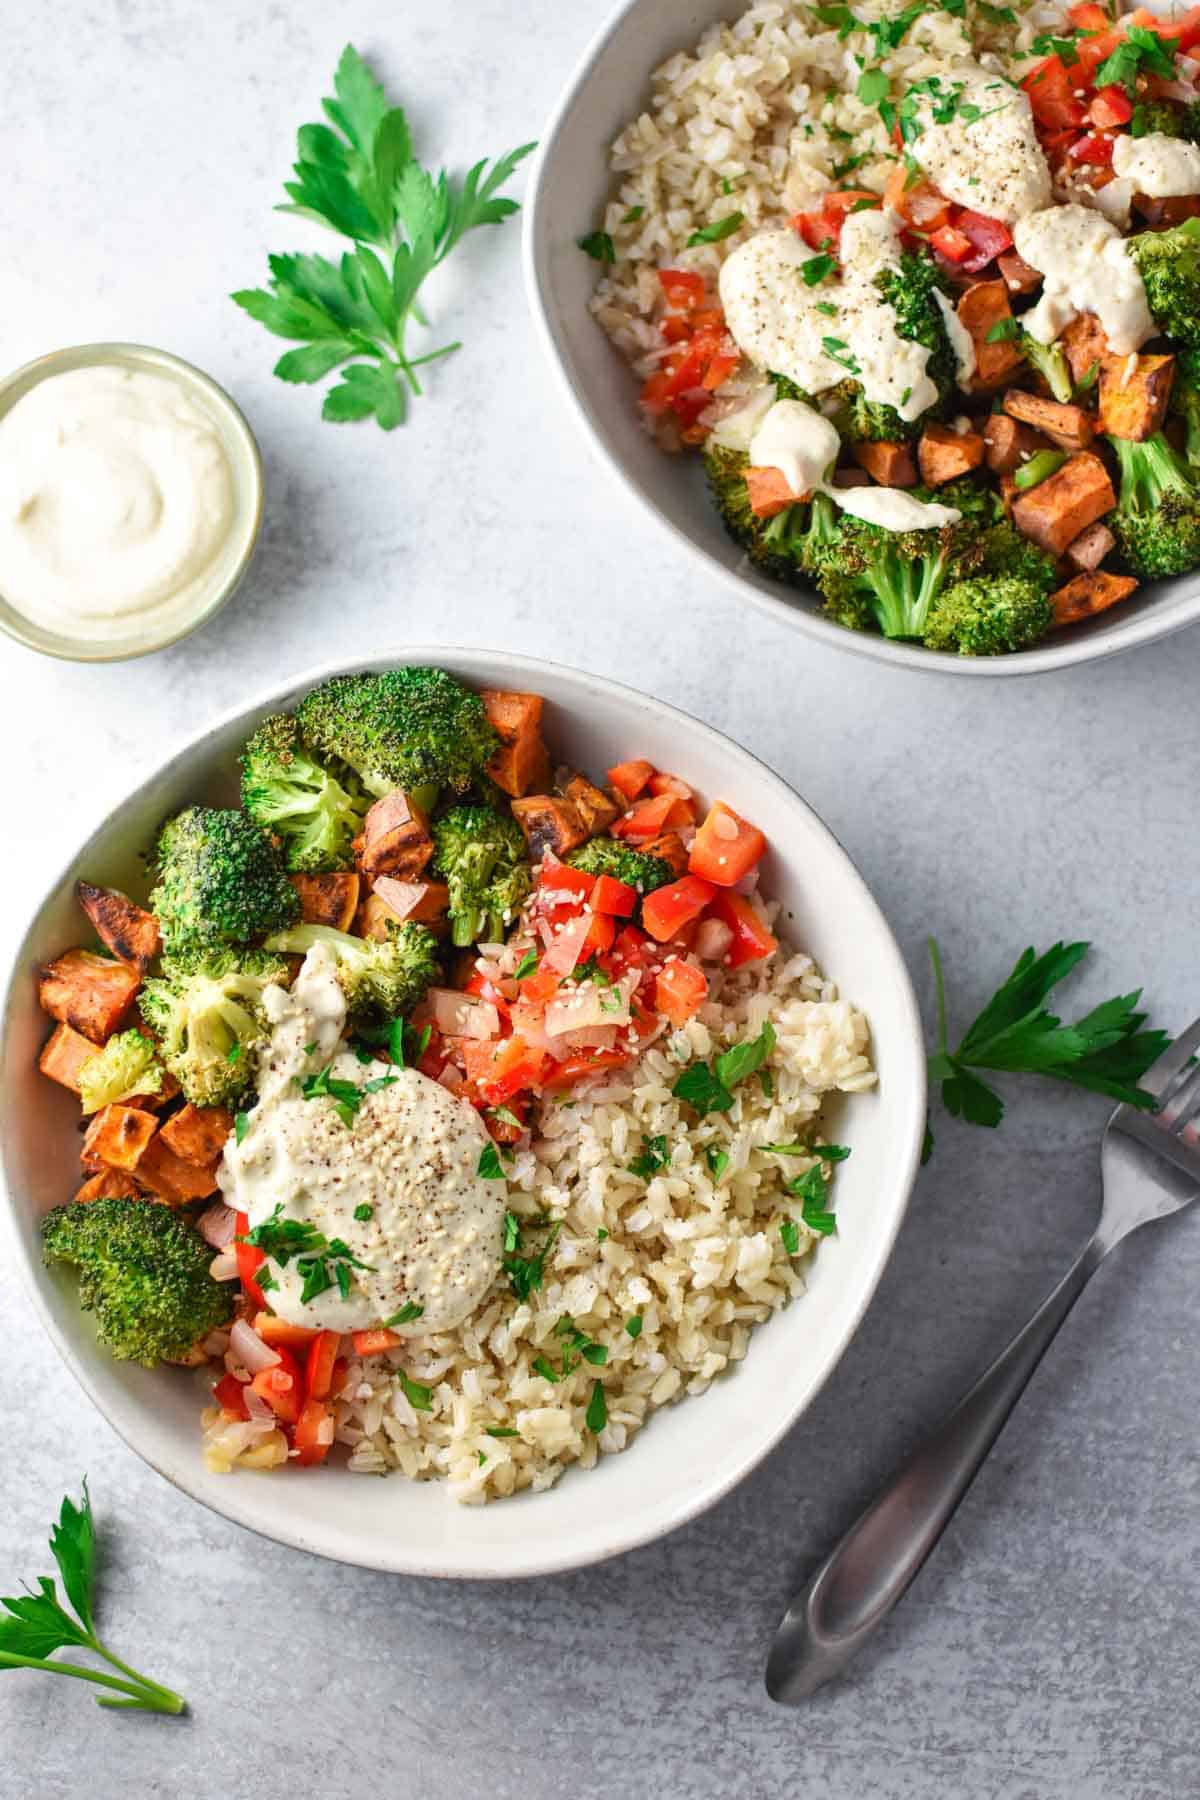 Two sweet potato bowls filled with rice, broccoli, and veggies next to a small bowl of creamy tahini sauce.